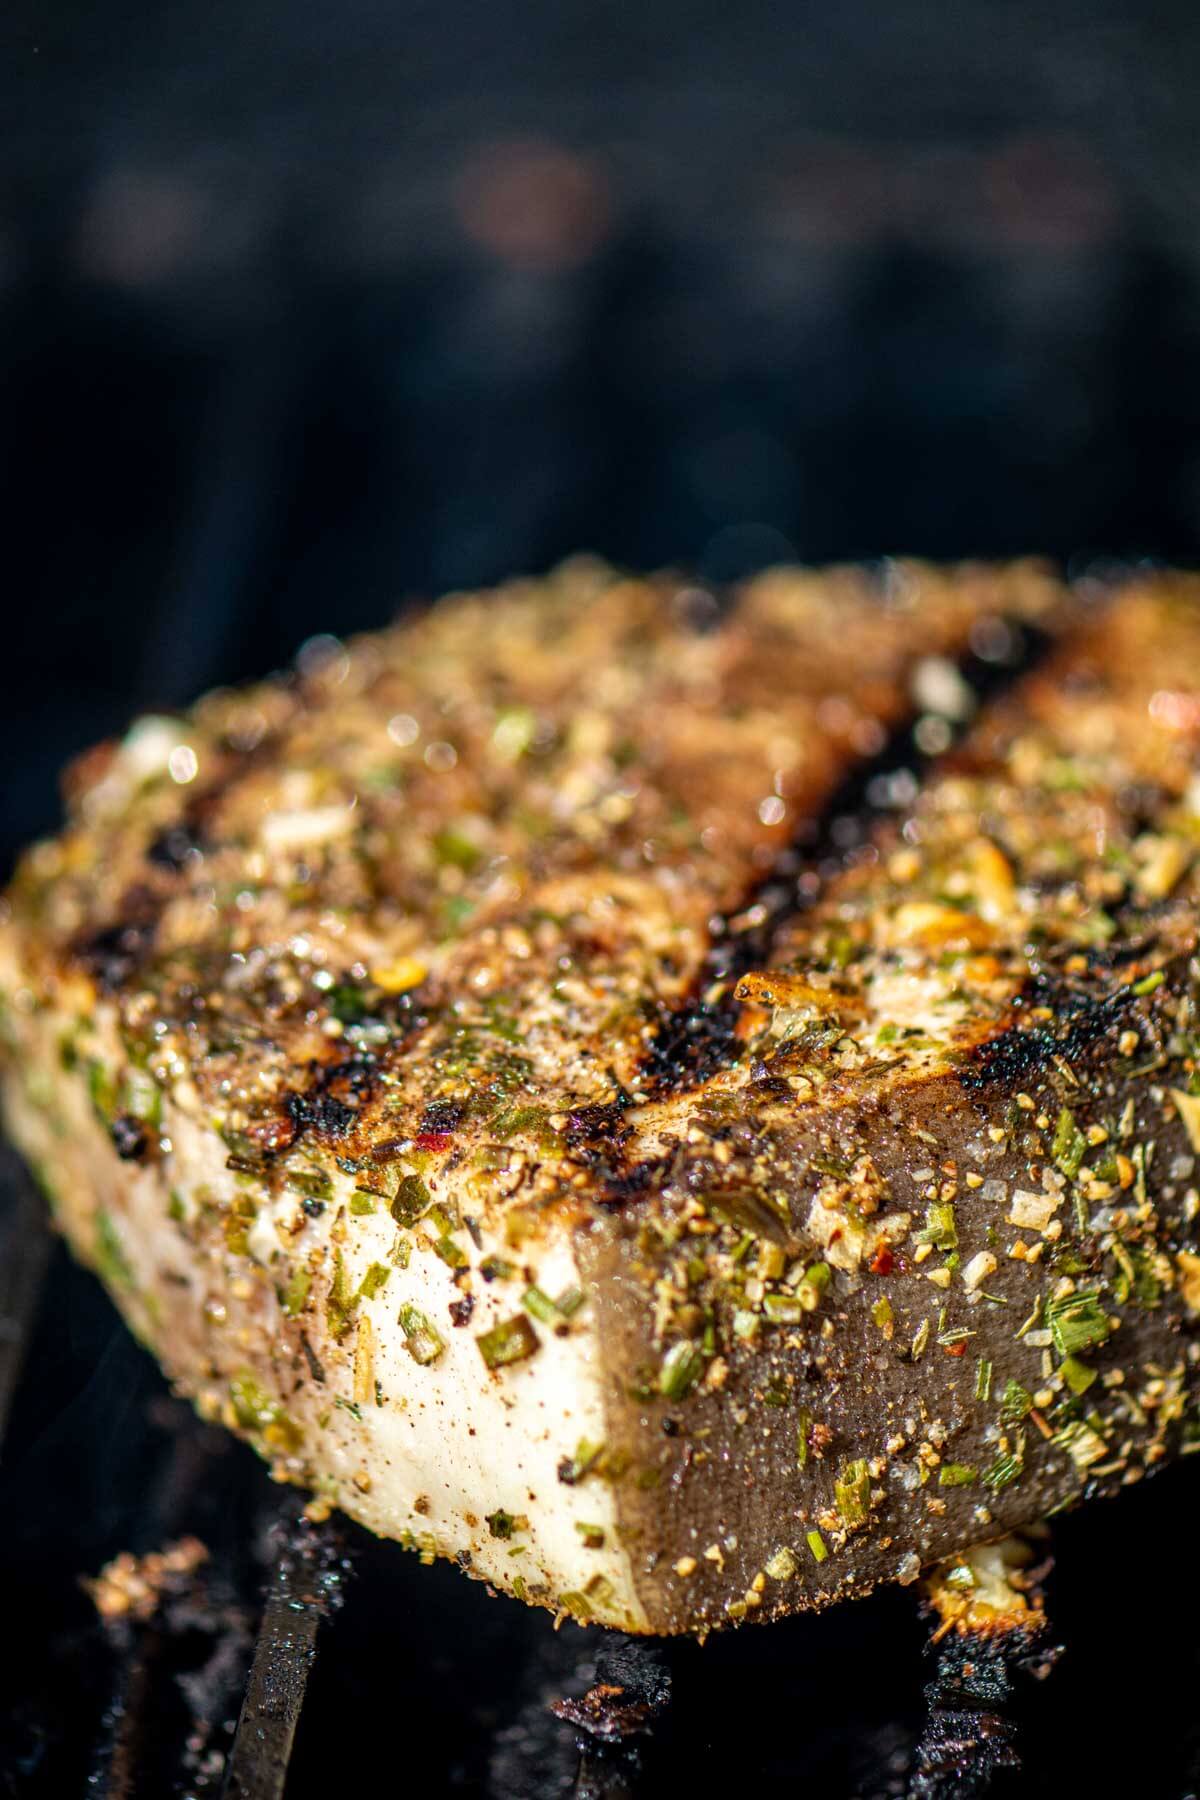 swordfish steak on the grill grate with sear marks and coated in a homemade jerk seasoning rub.